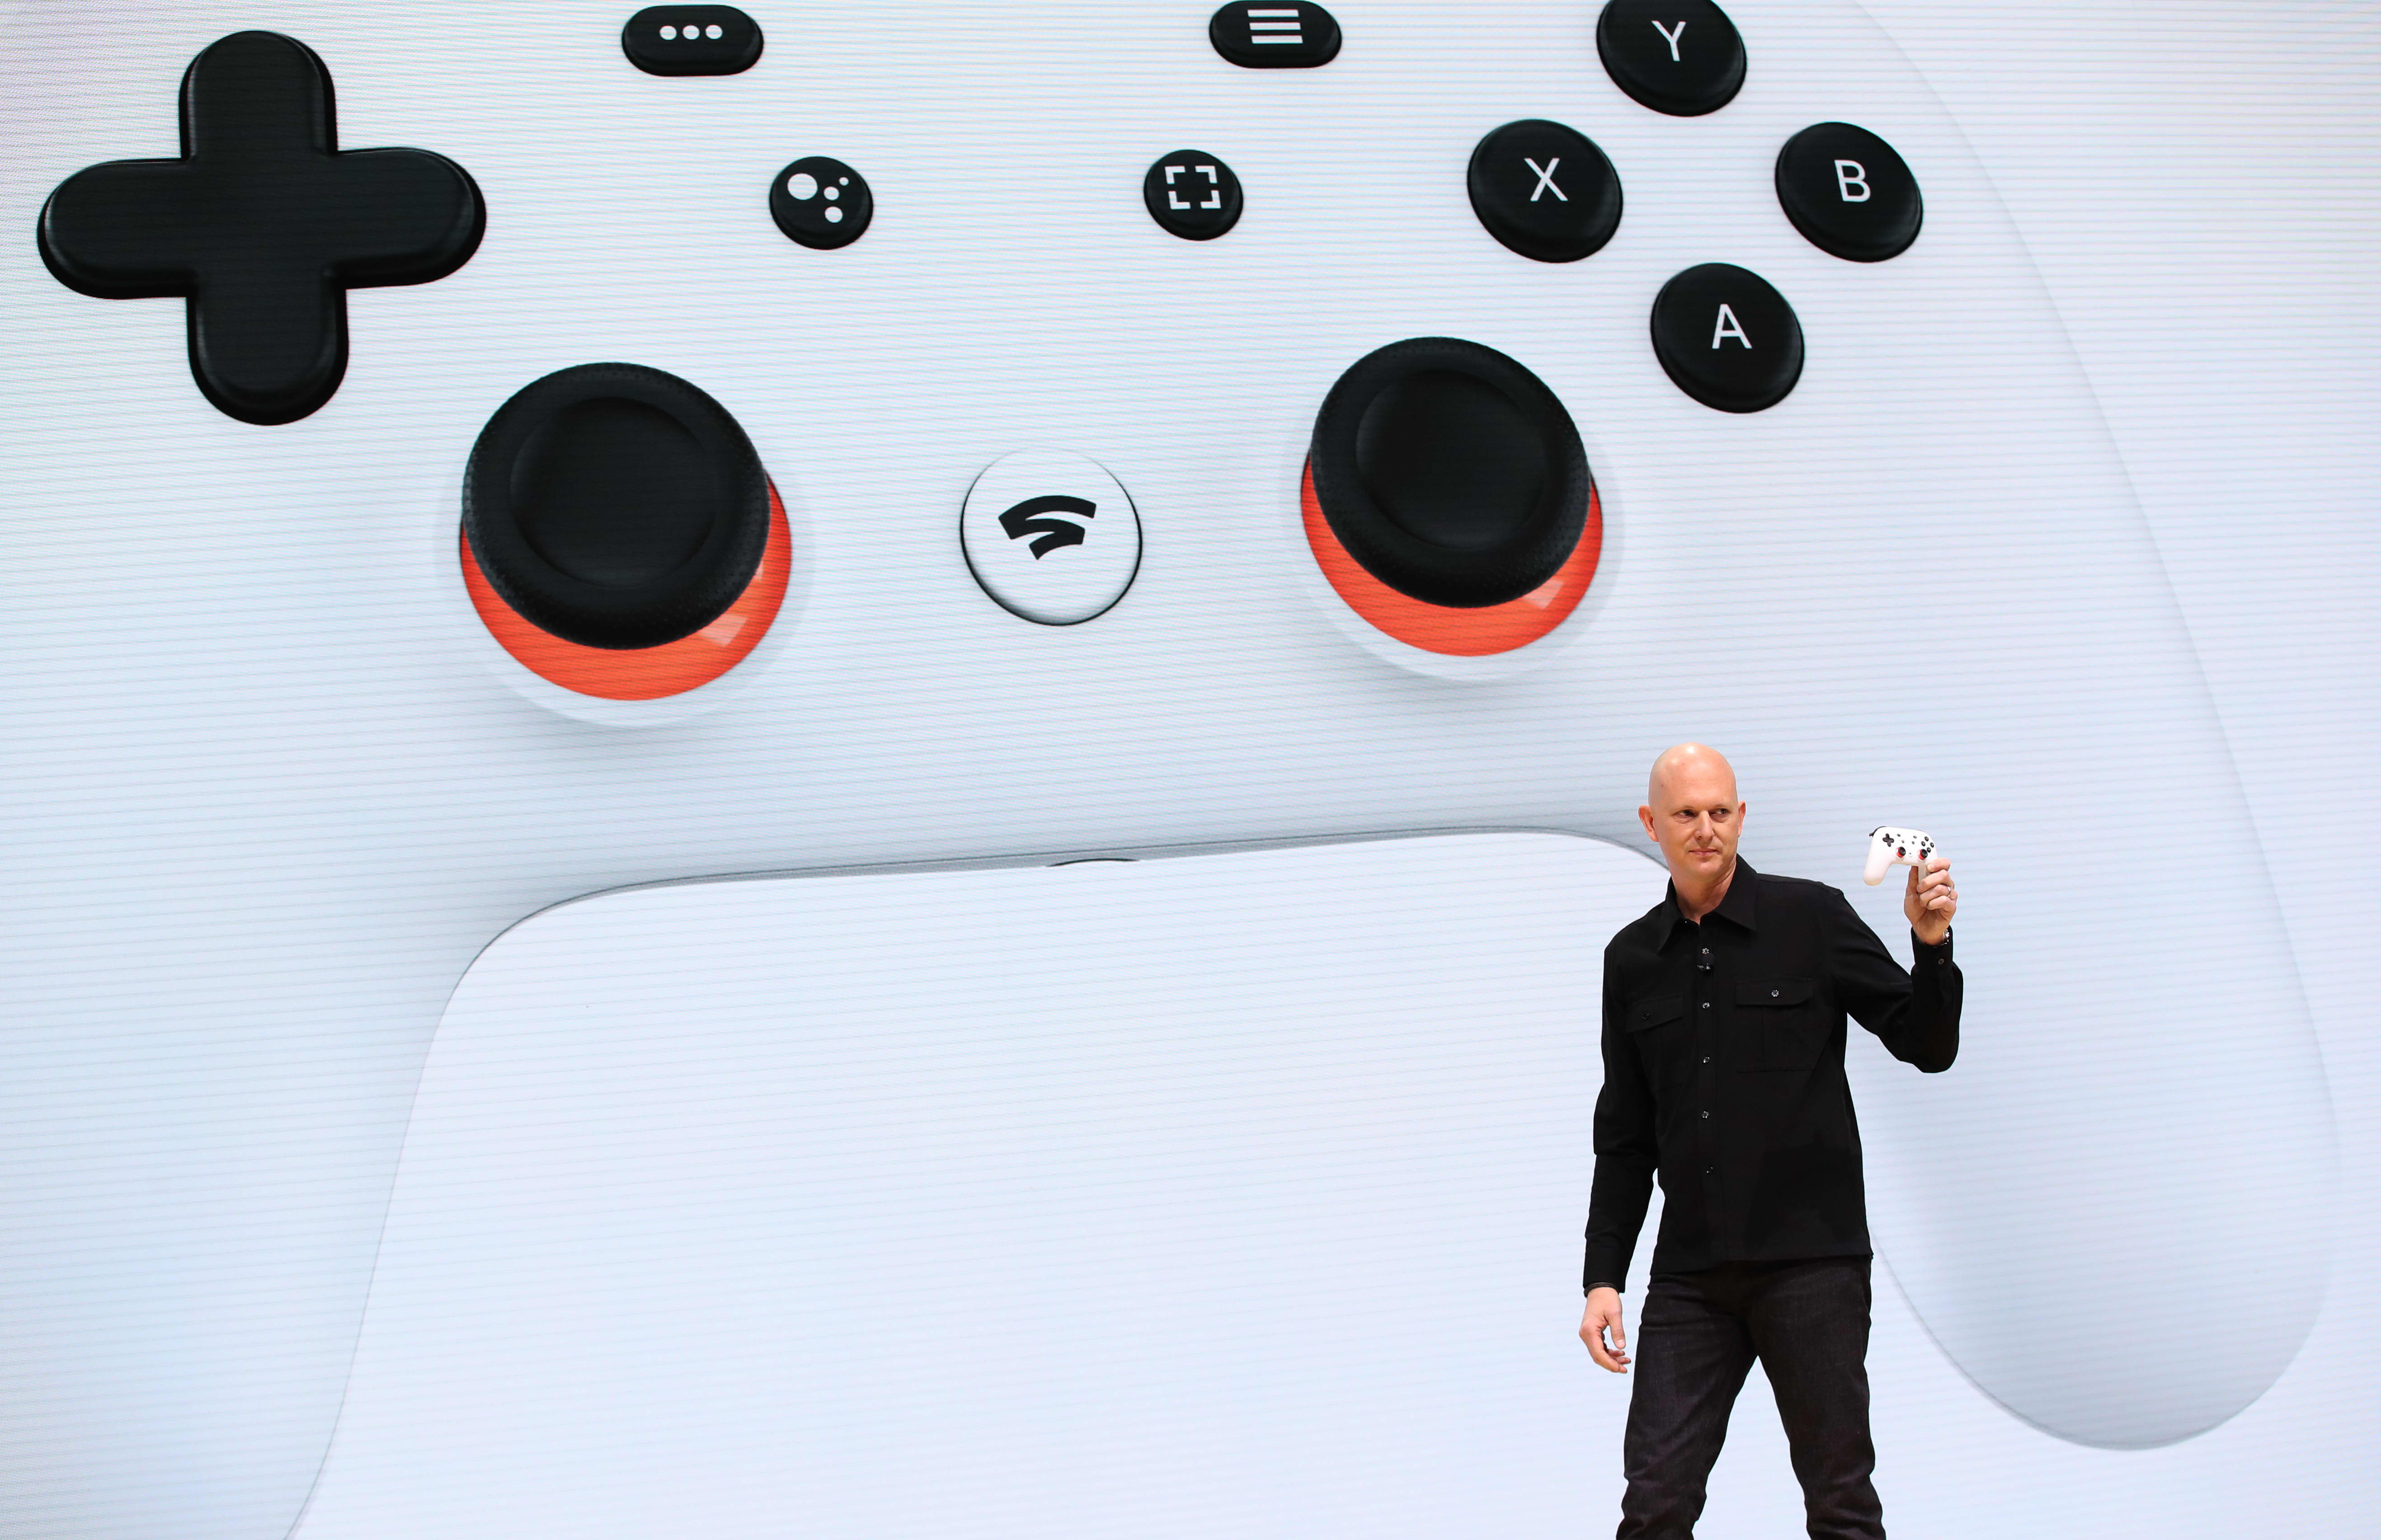 Xbox Cloud Gaming Beta joins Stadia in the web browser and you can play it  right now